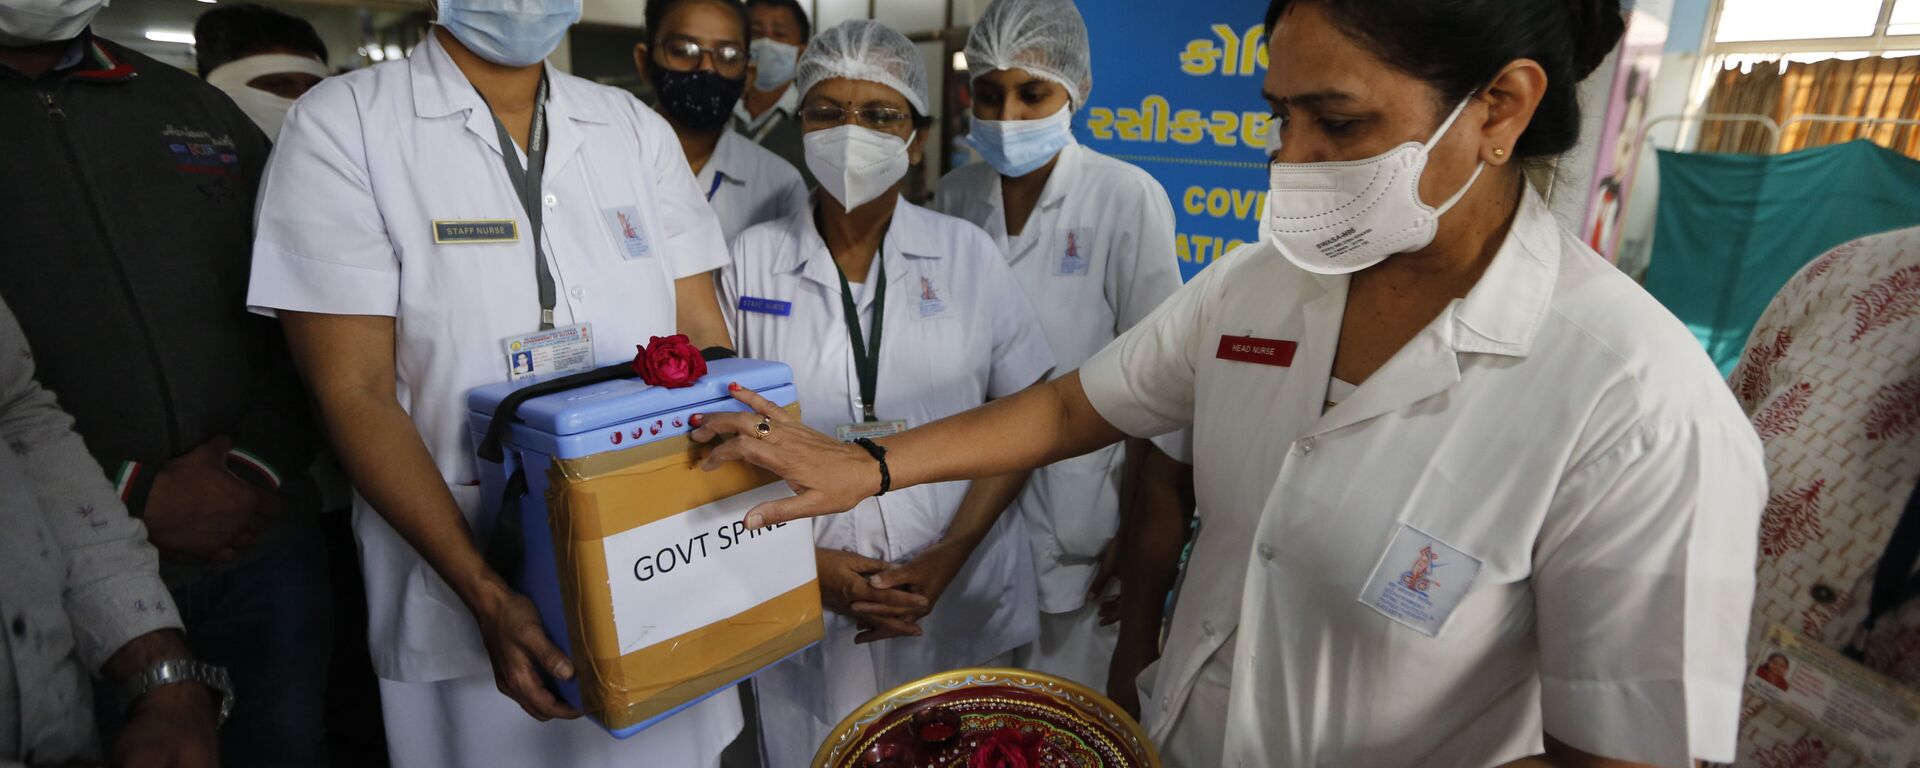 A nurse, right, takes delivery of a box containing COVID-19 vaccines as it arrives at a government hospital in Ahmedabad, Gujarat state, India on Saturday, 16 January 2021. - Sputnik International, 1920, 12.05.2021